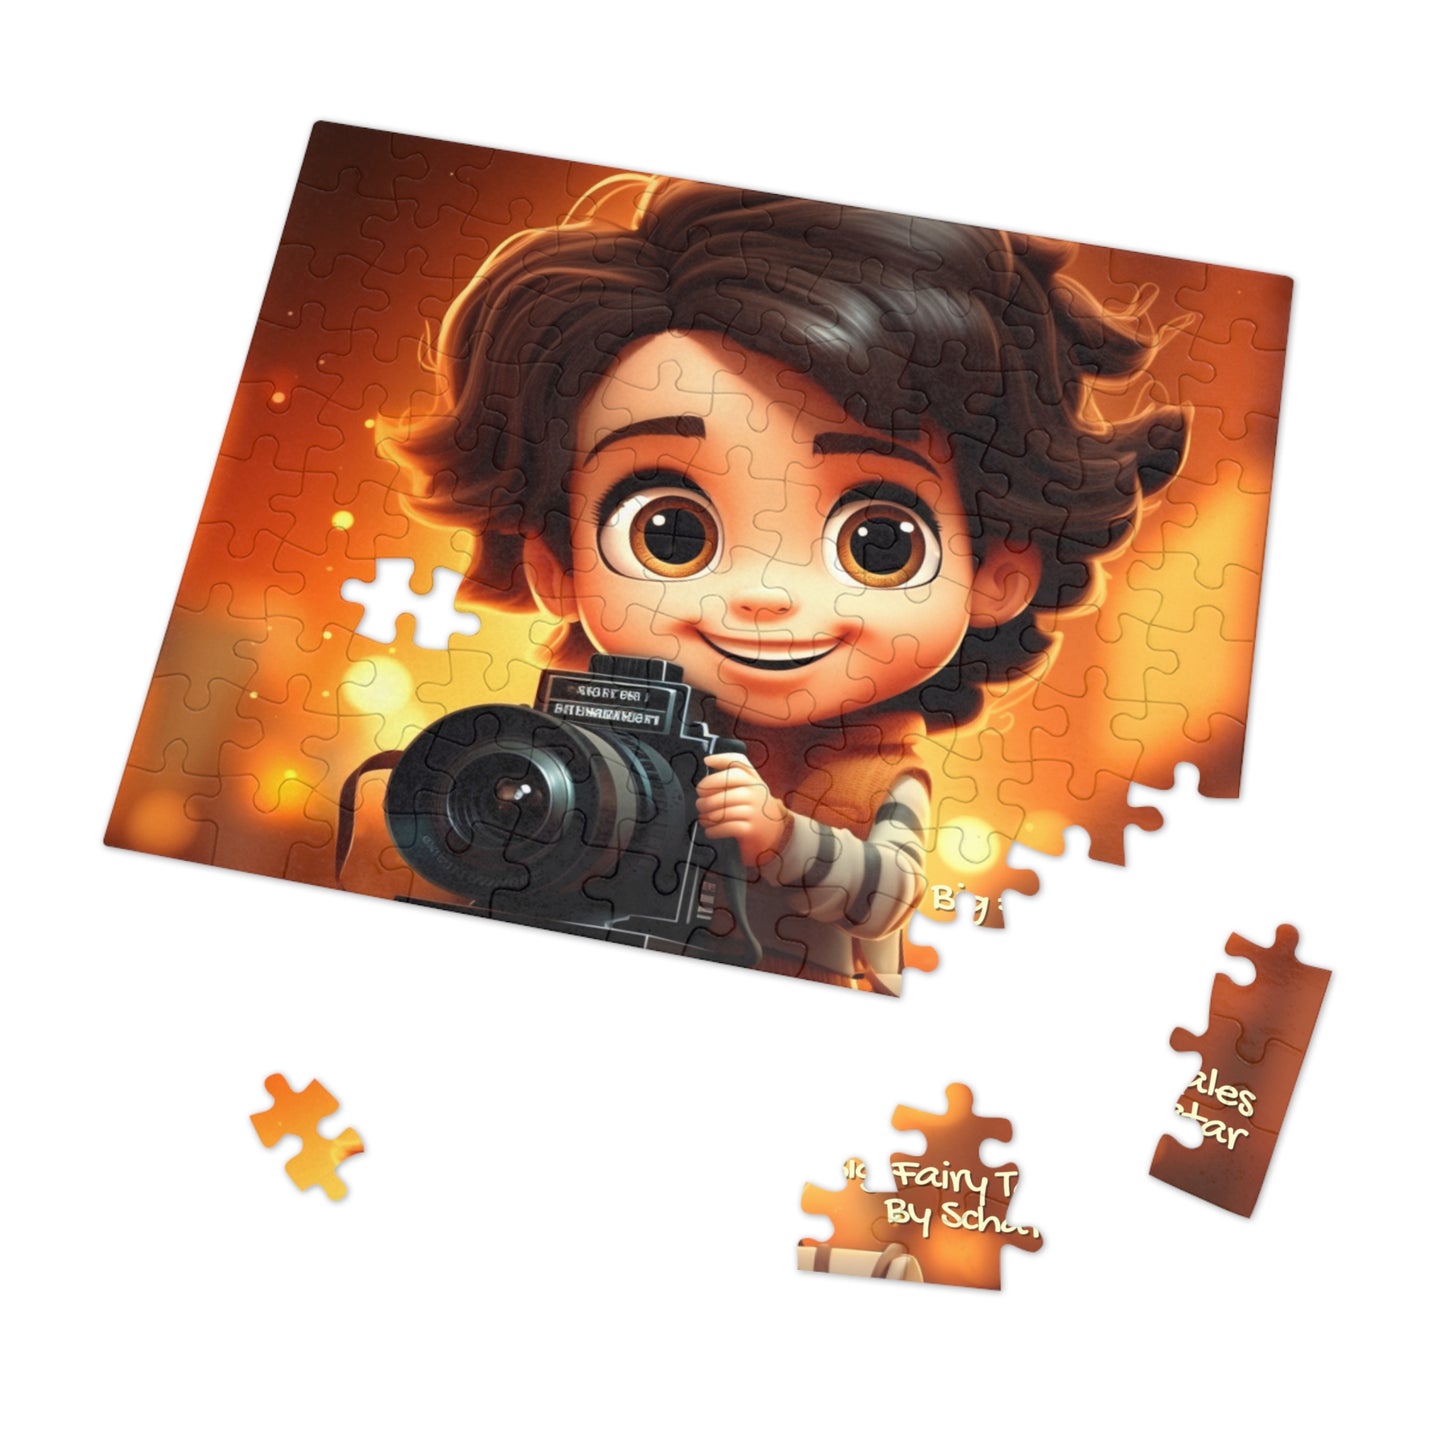 Cinematographer - Big Little Professionals Puzzle 4 From Big Fairy Tales By Schatar